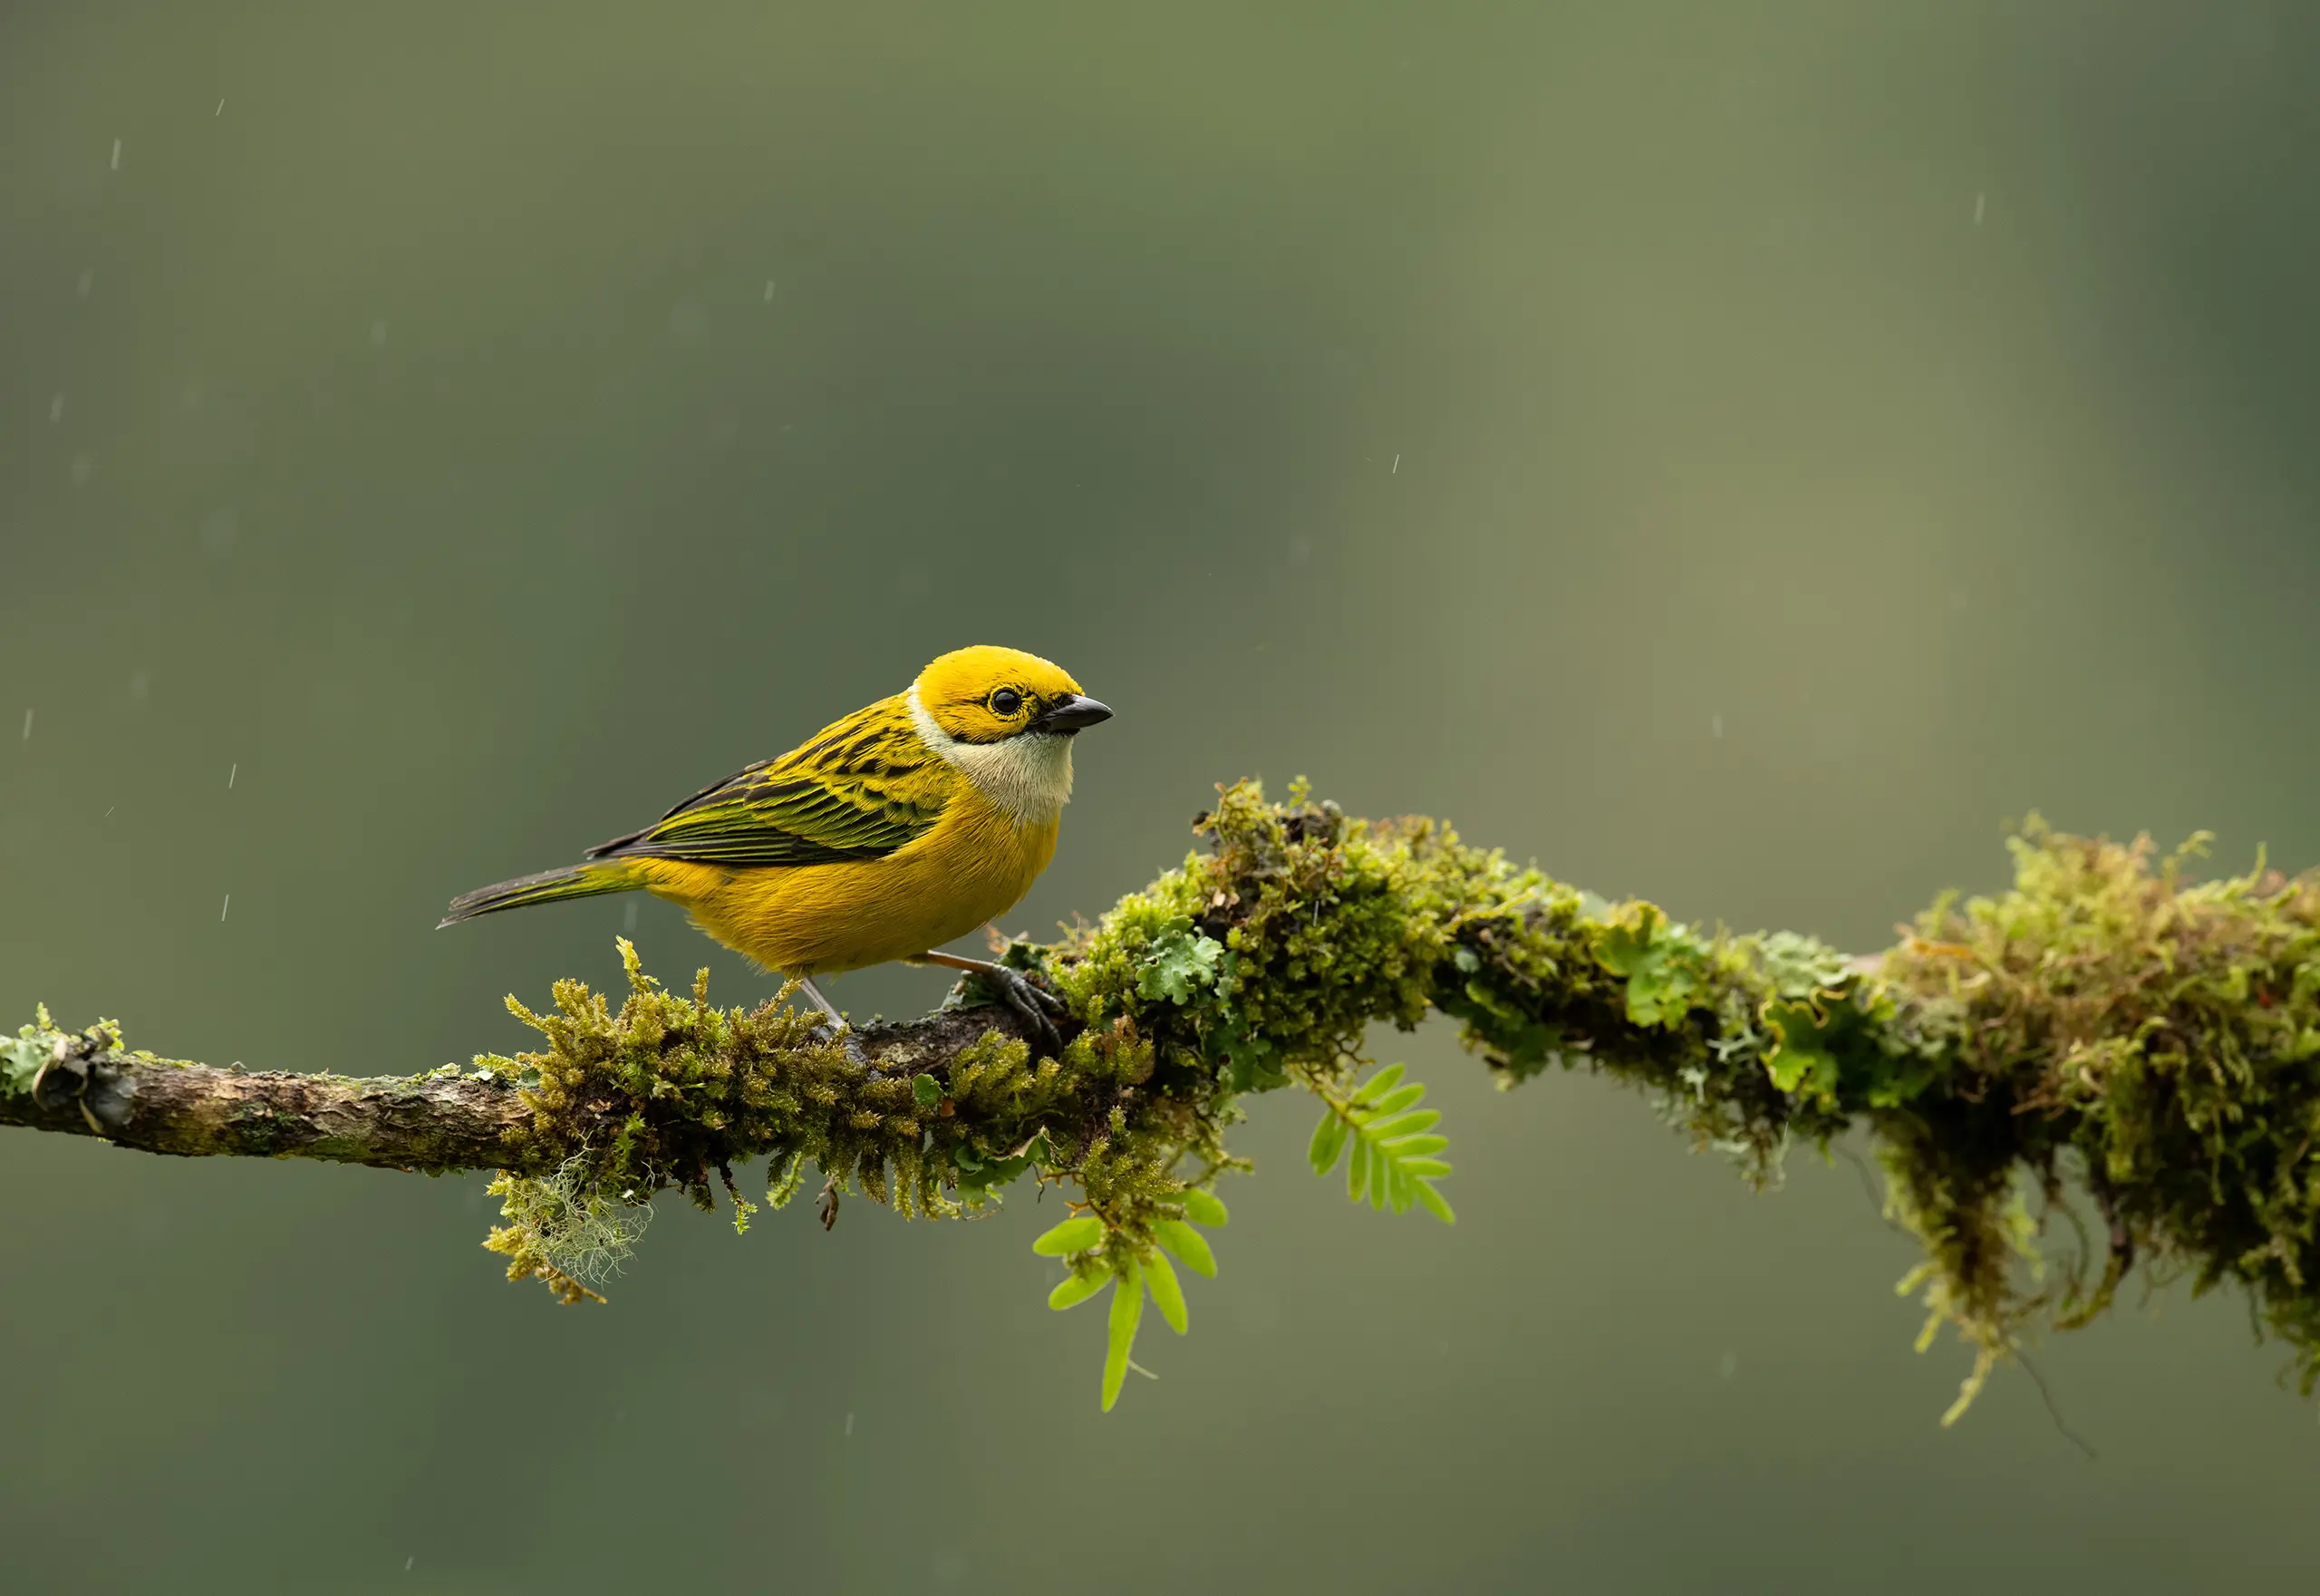 A Golden Tanager perched on a branch in the rain.